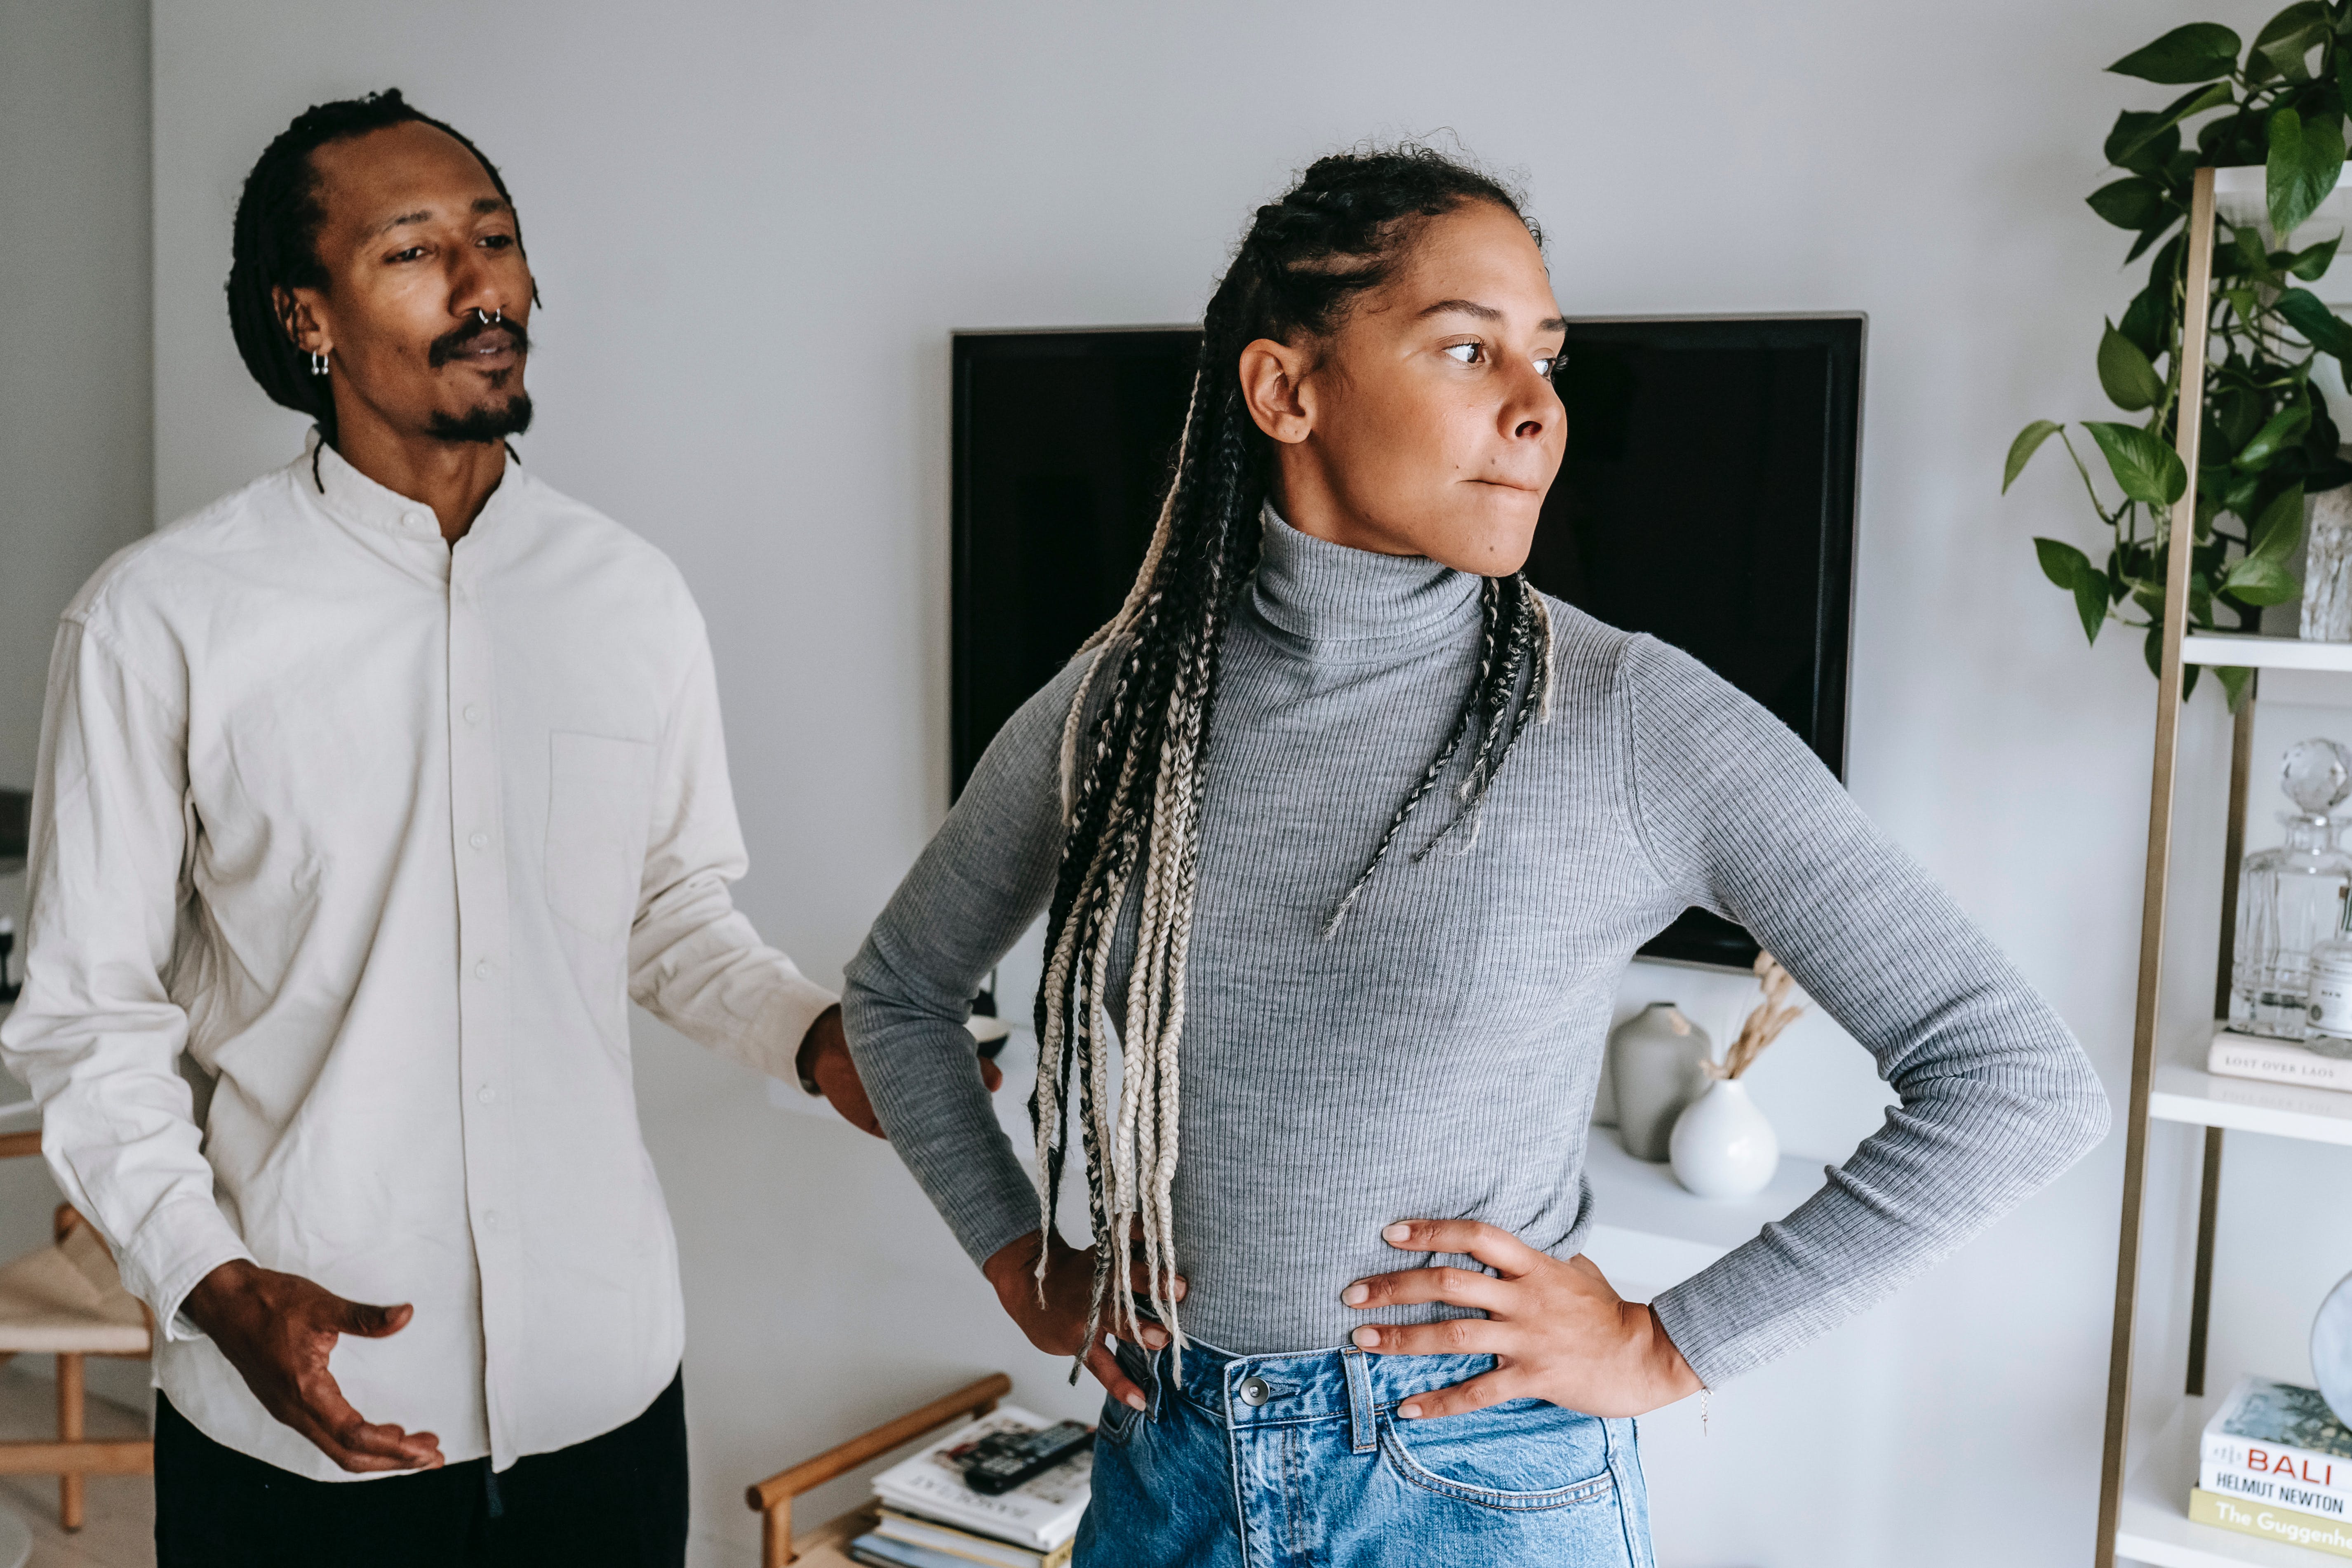 A man trying to make amends with an upset woman | Source: Pexels